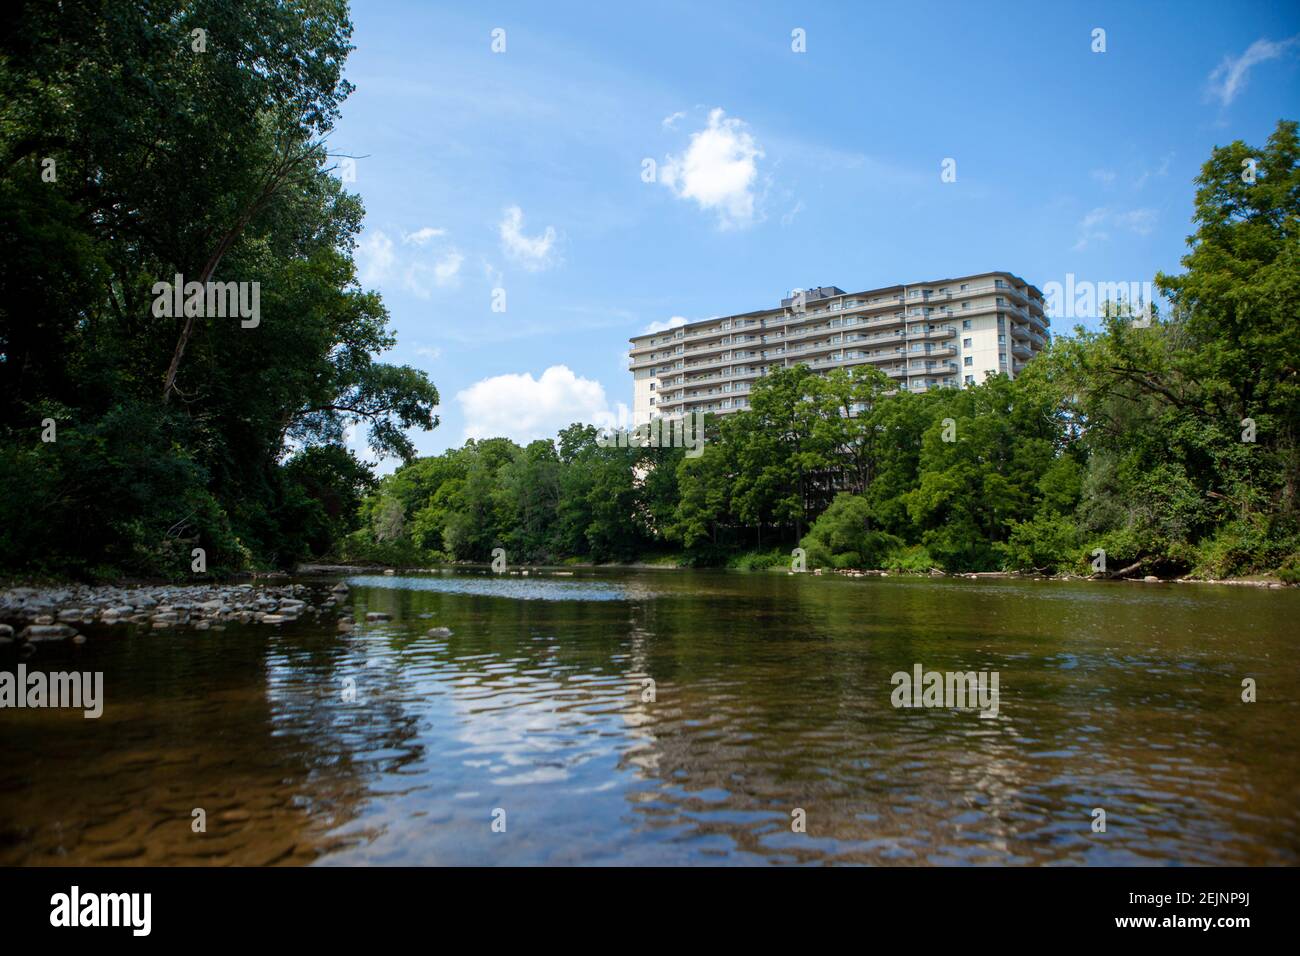 Apartment Building on the Thames River under Blue Summer Sky in London Ontario Canada with clear fresh water and surrounded by forest trees on the sho Stock Photo